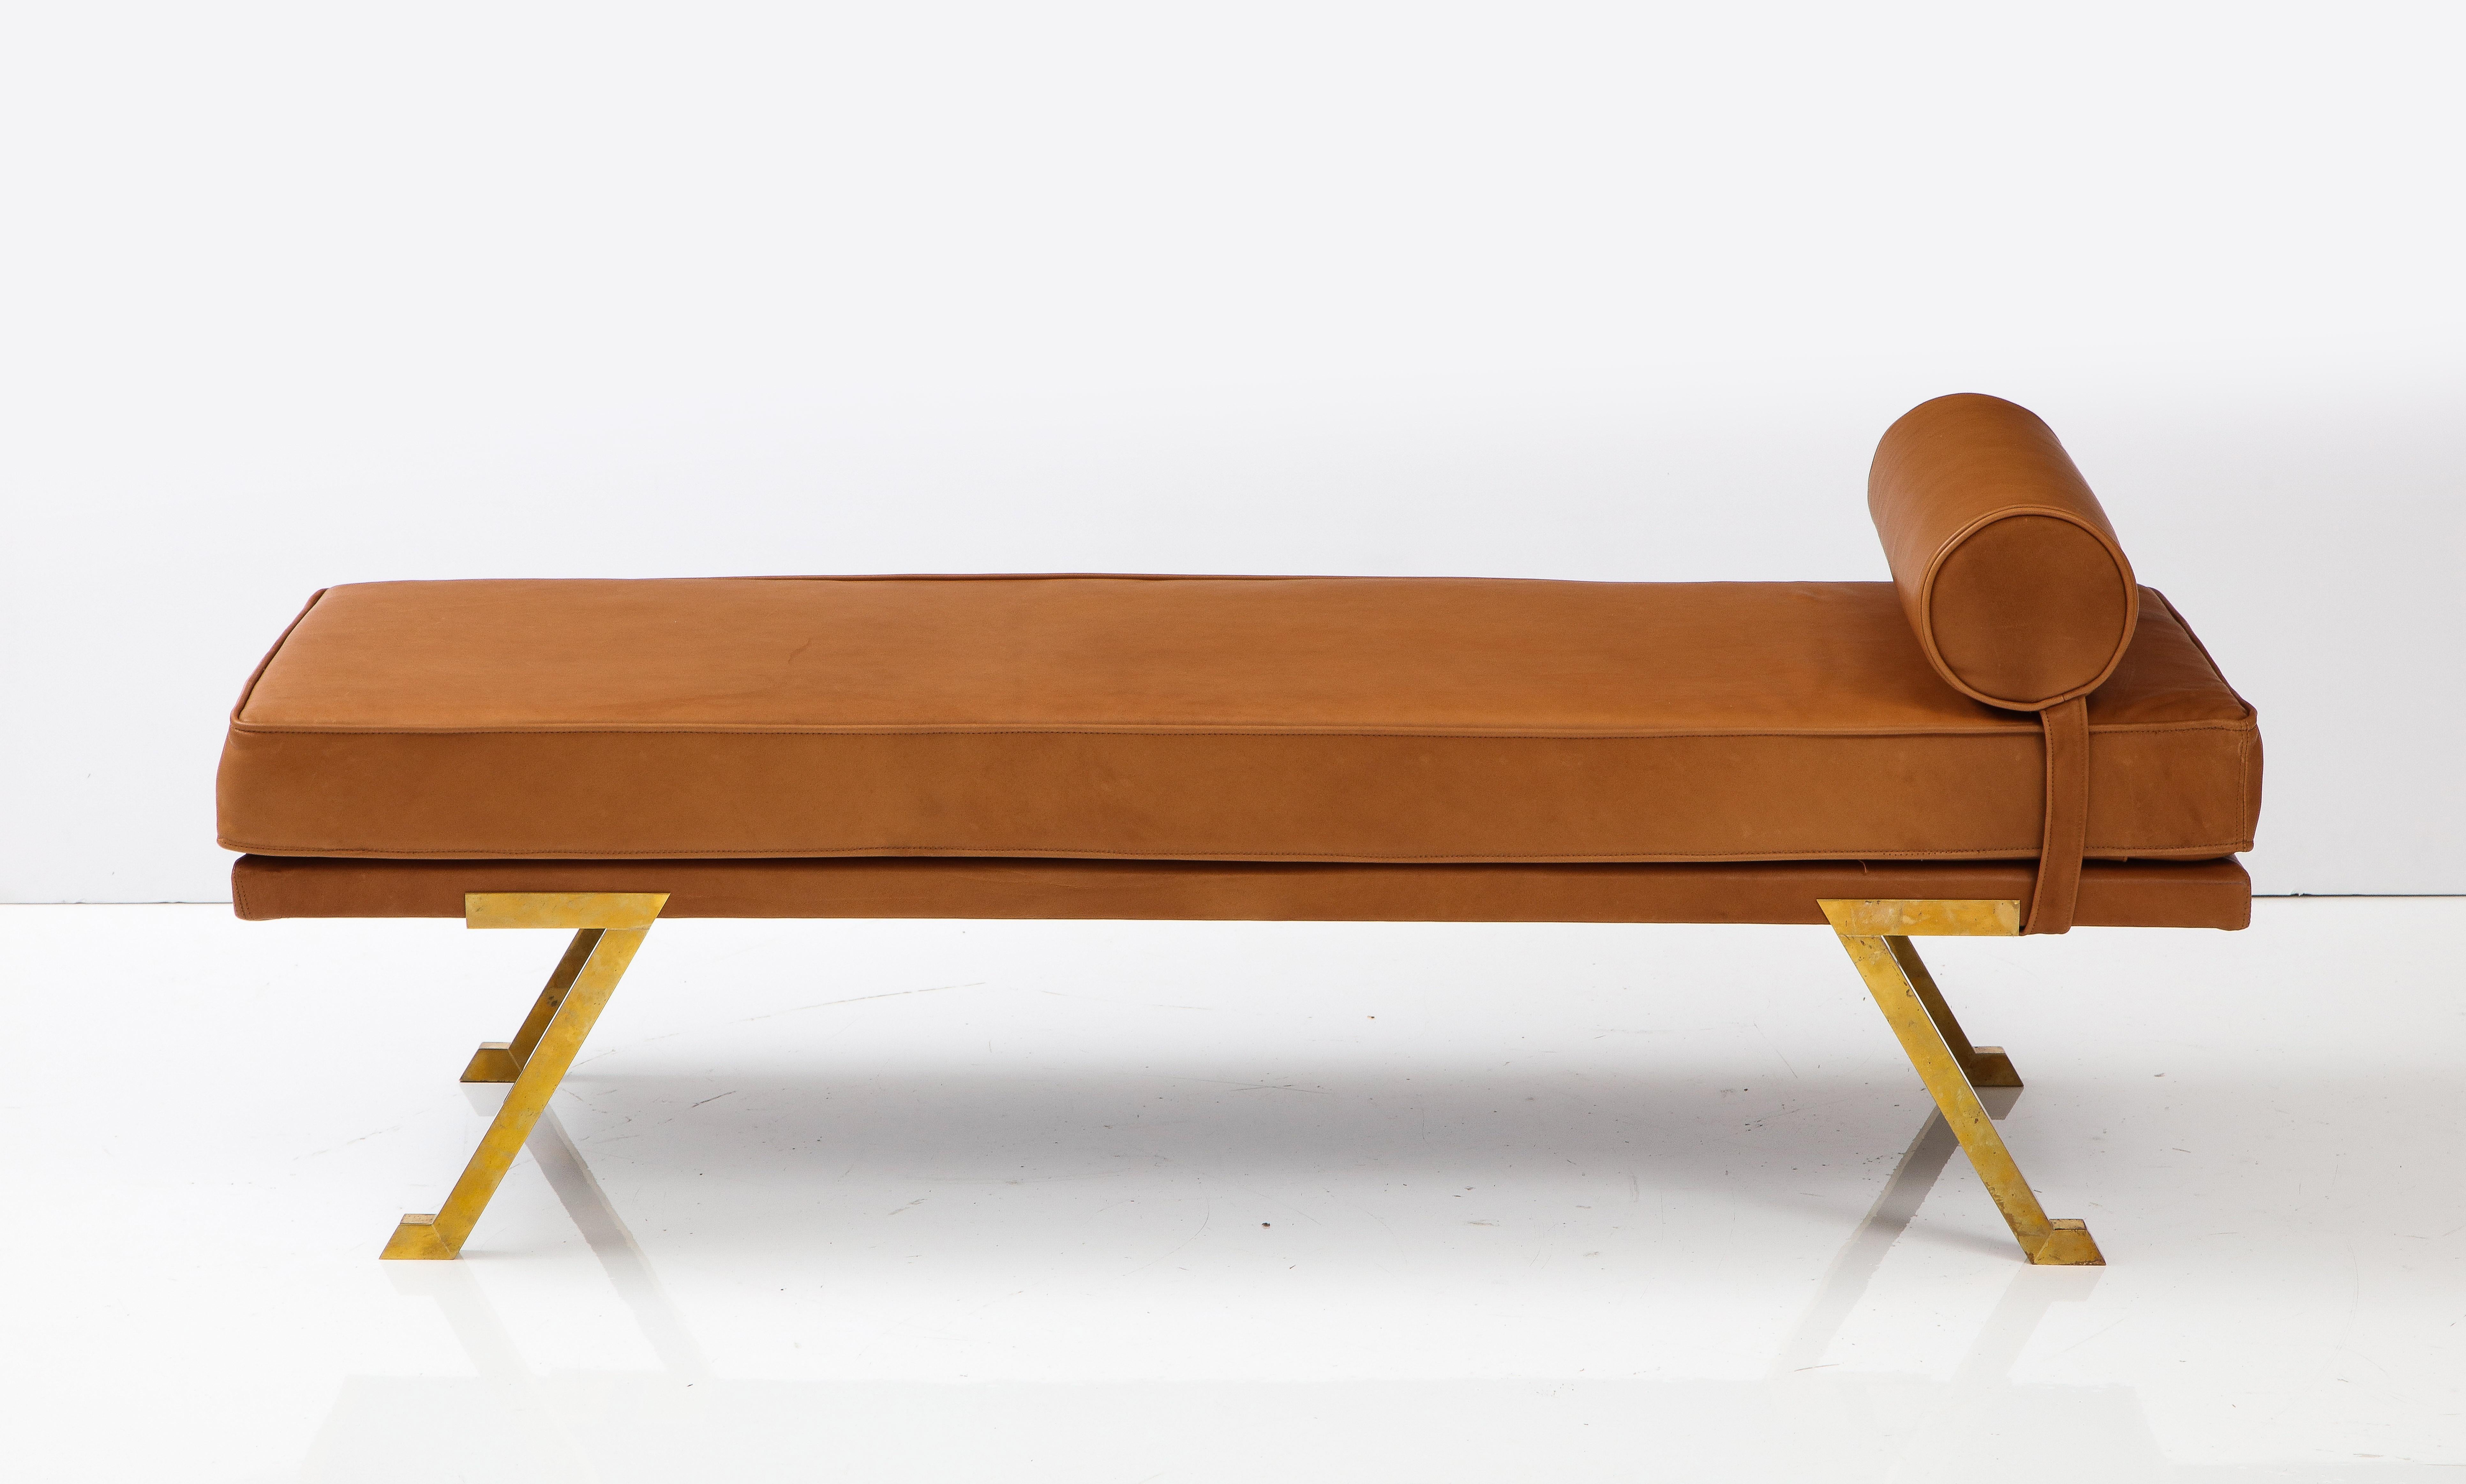 An Italian 1970's daybed or chaise longue, both glamorous and organic in design with four brass angled legs which support the bed, newly reupholstered in a sumptuous Italian cognac colored leather with detachable head support bolster. 
Italy, circa